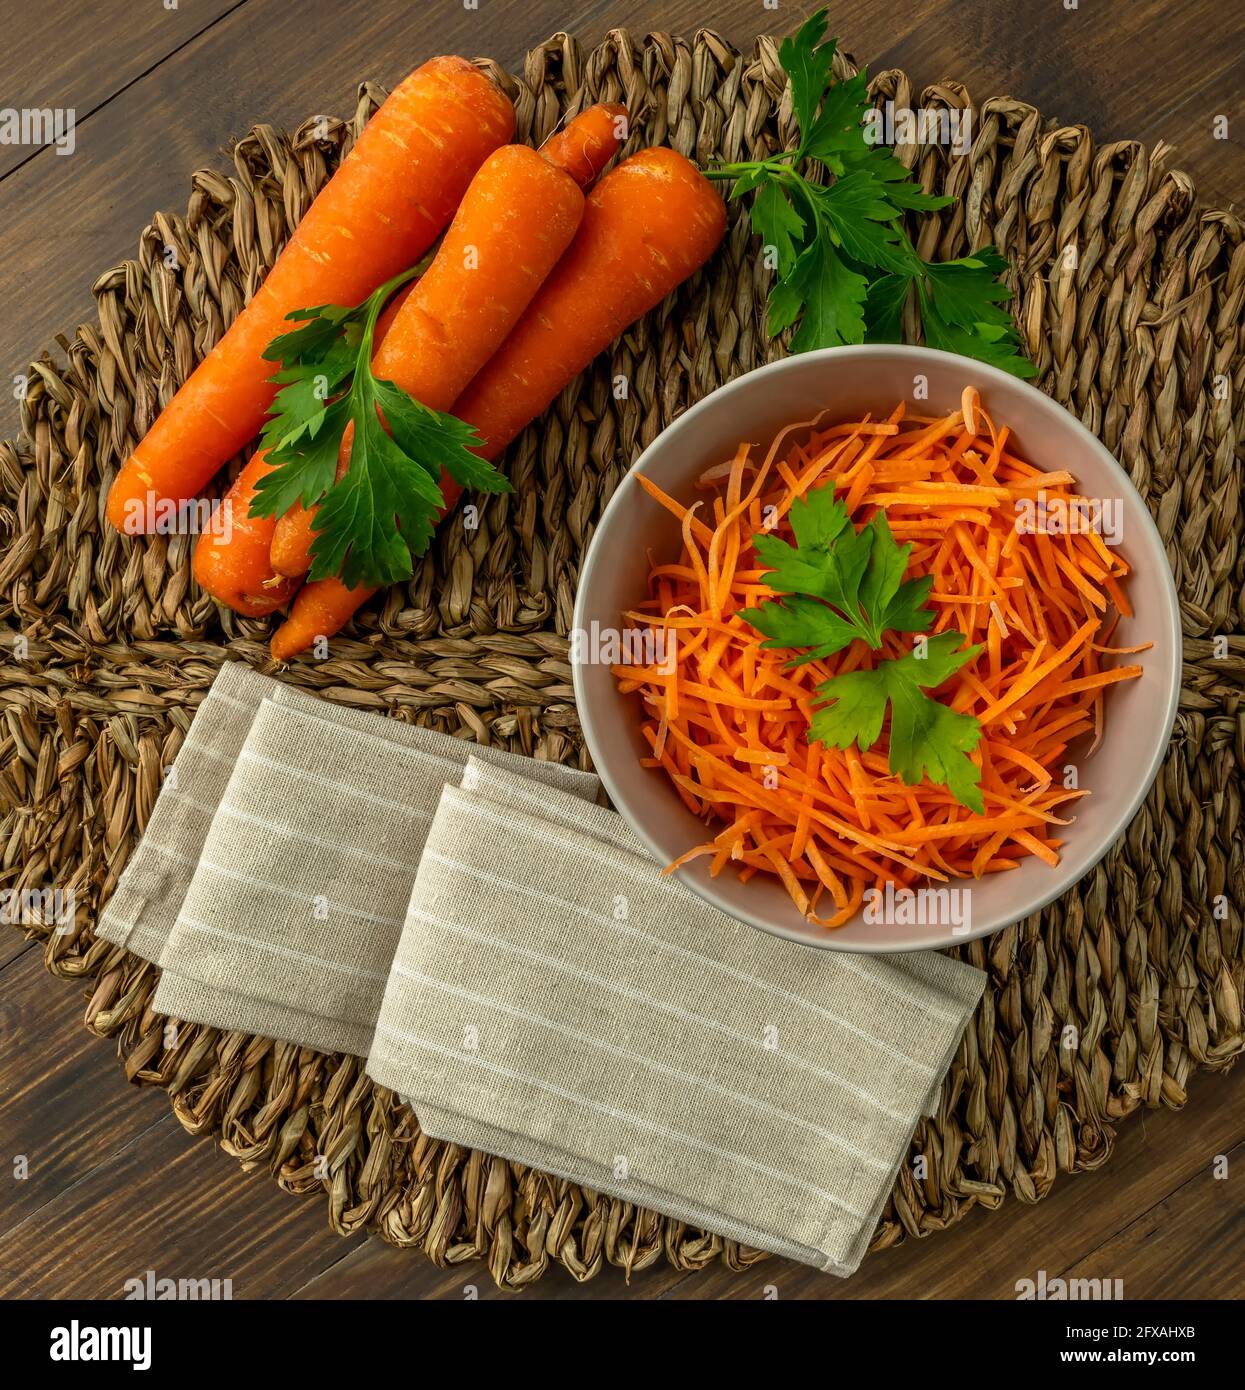 Composition of whole and julienned carrots on a straw mat with parsley leaves and beige napkin Stock Photo